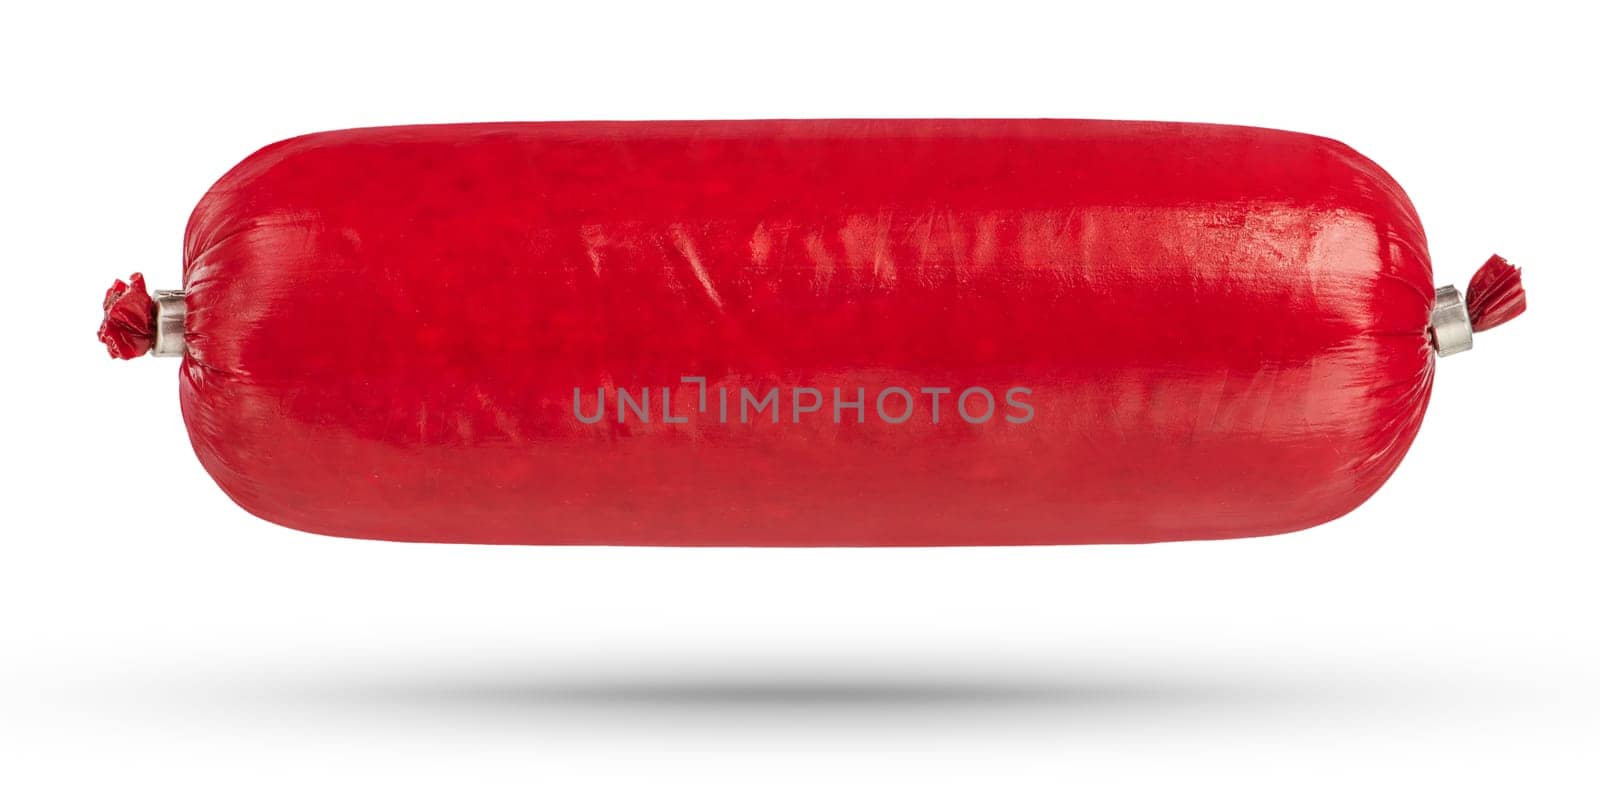 Packed salami sausage close-up on a white isolated background. The sausage hangs or falls, casting a shadow. Salami is packed in a red protective film